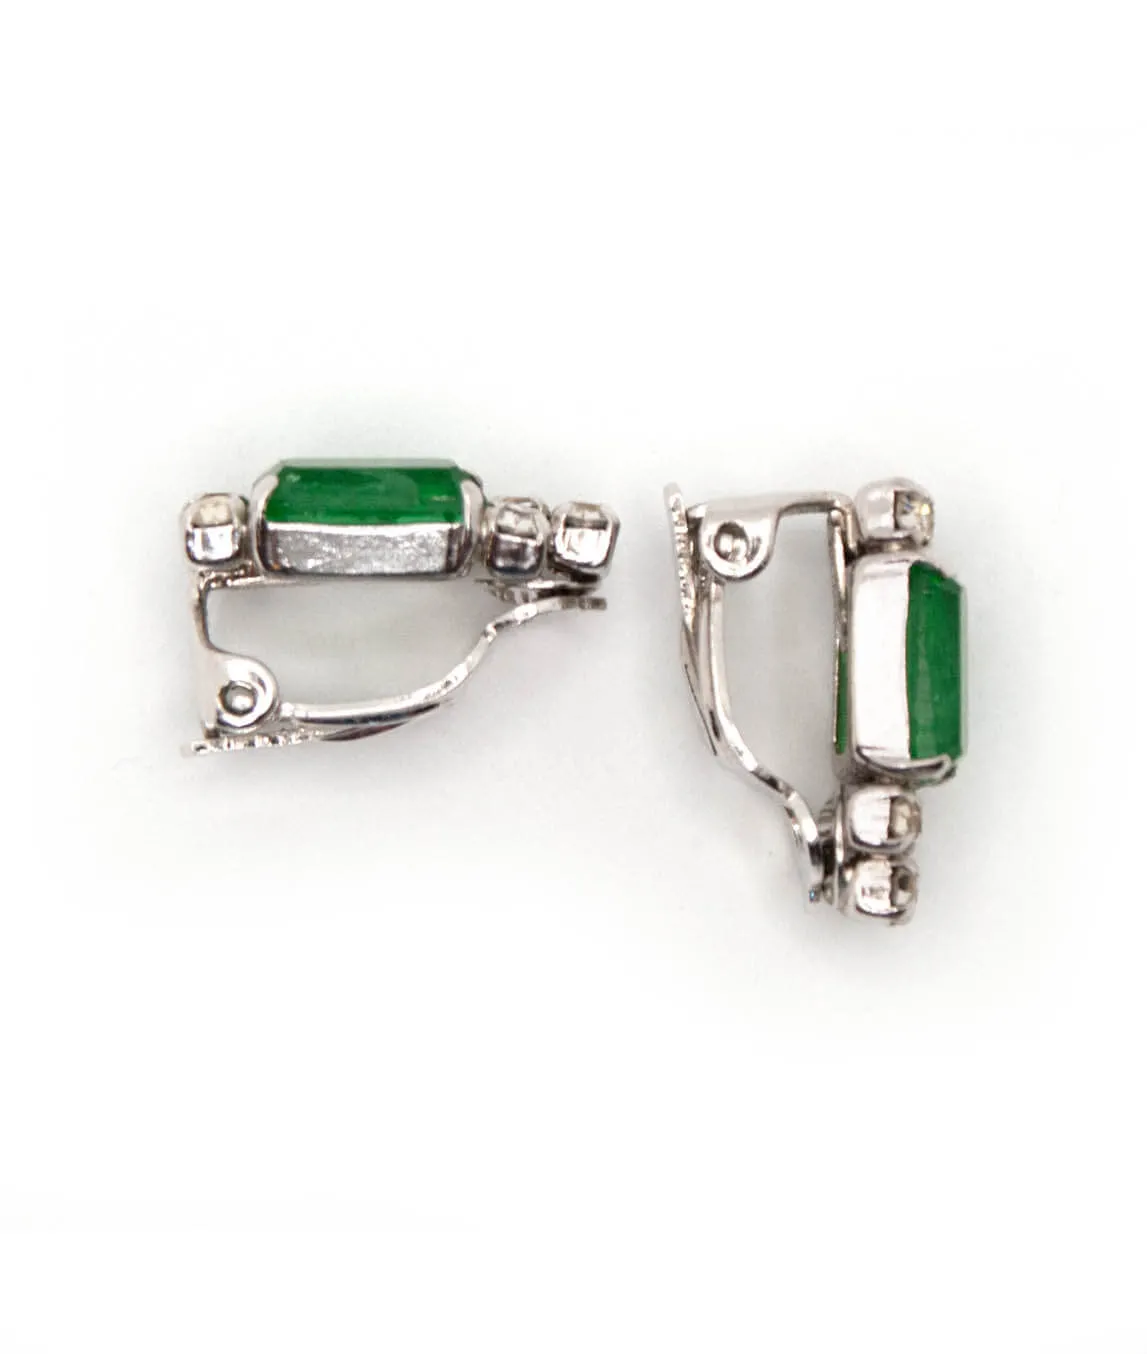 Christian Dior Emerald Green and clear paste earrings 1970s profile